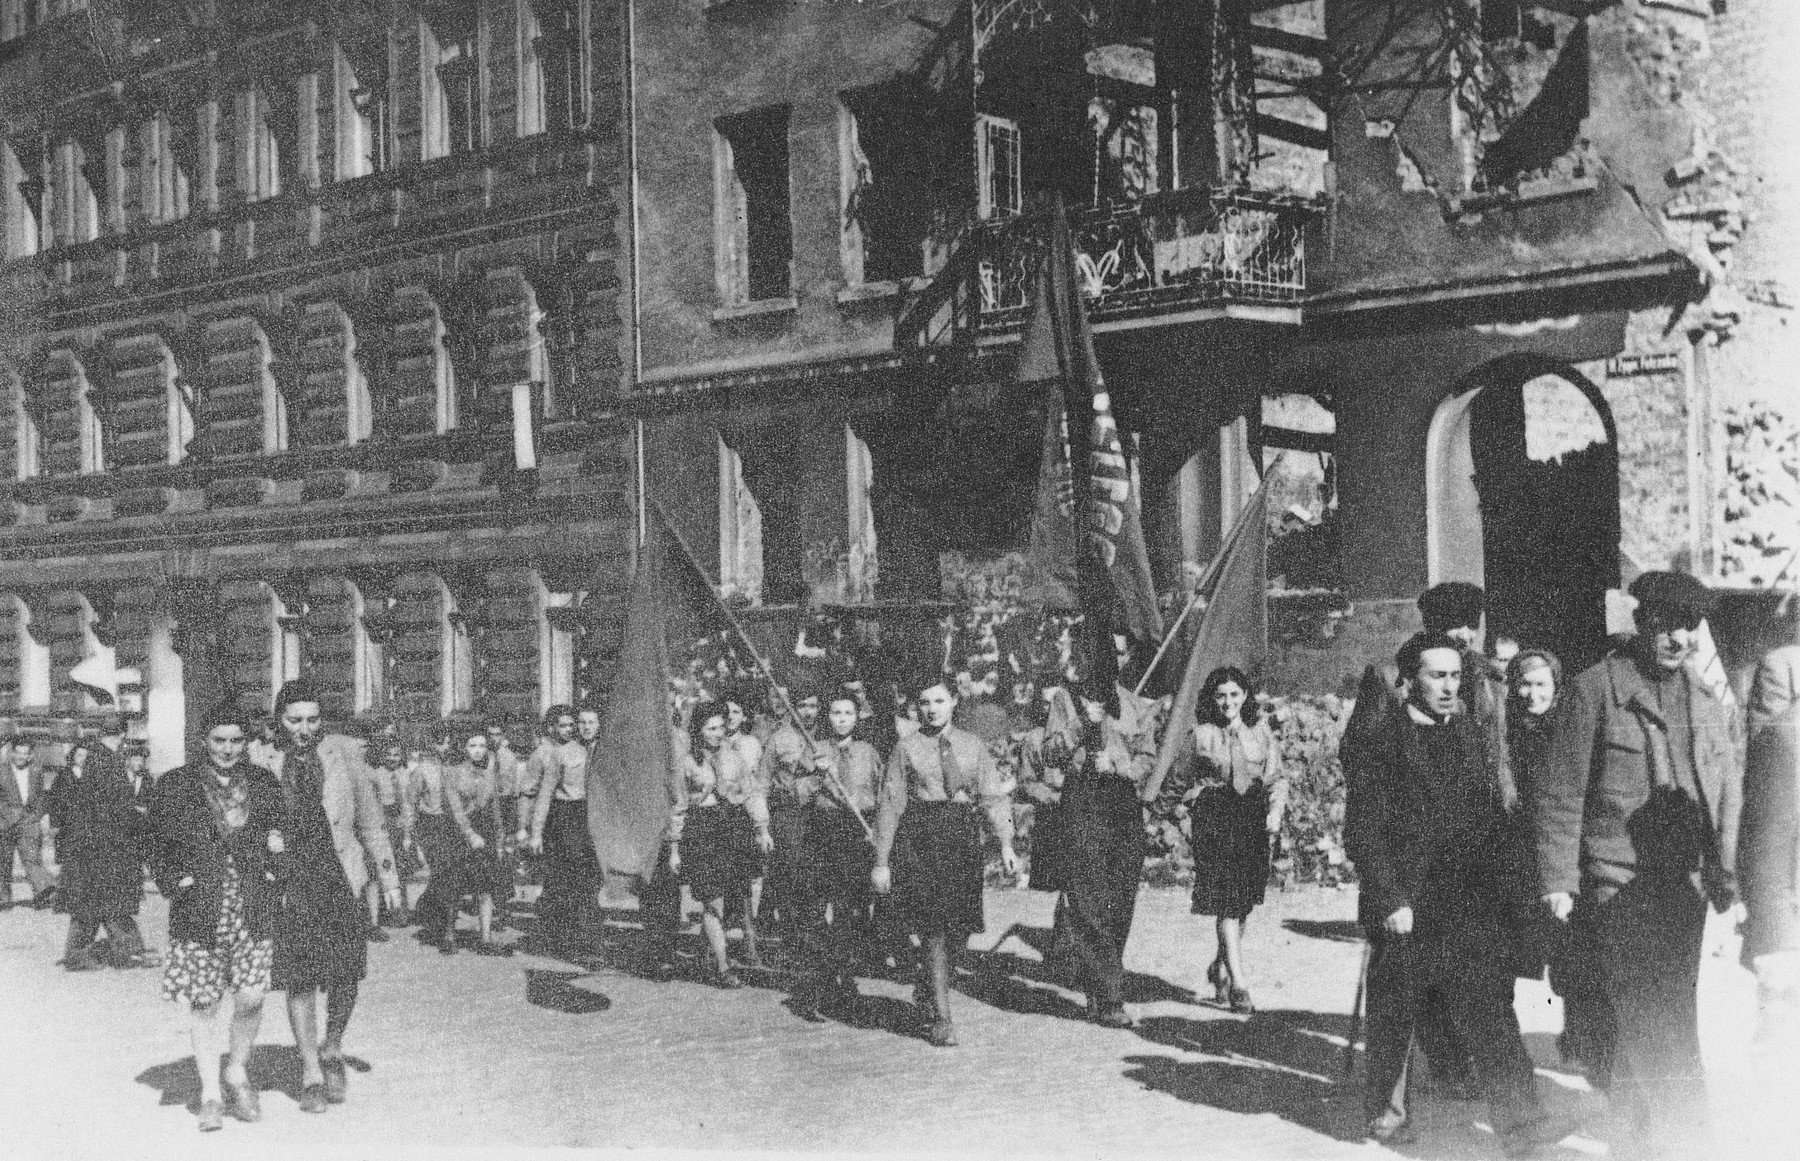 Helena Storch marches in a parade to commemorate the anniversary of the Warsaw ghetto uprising.